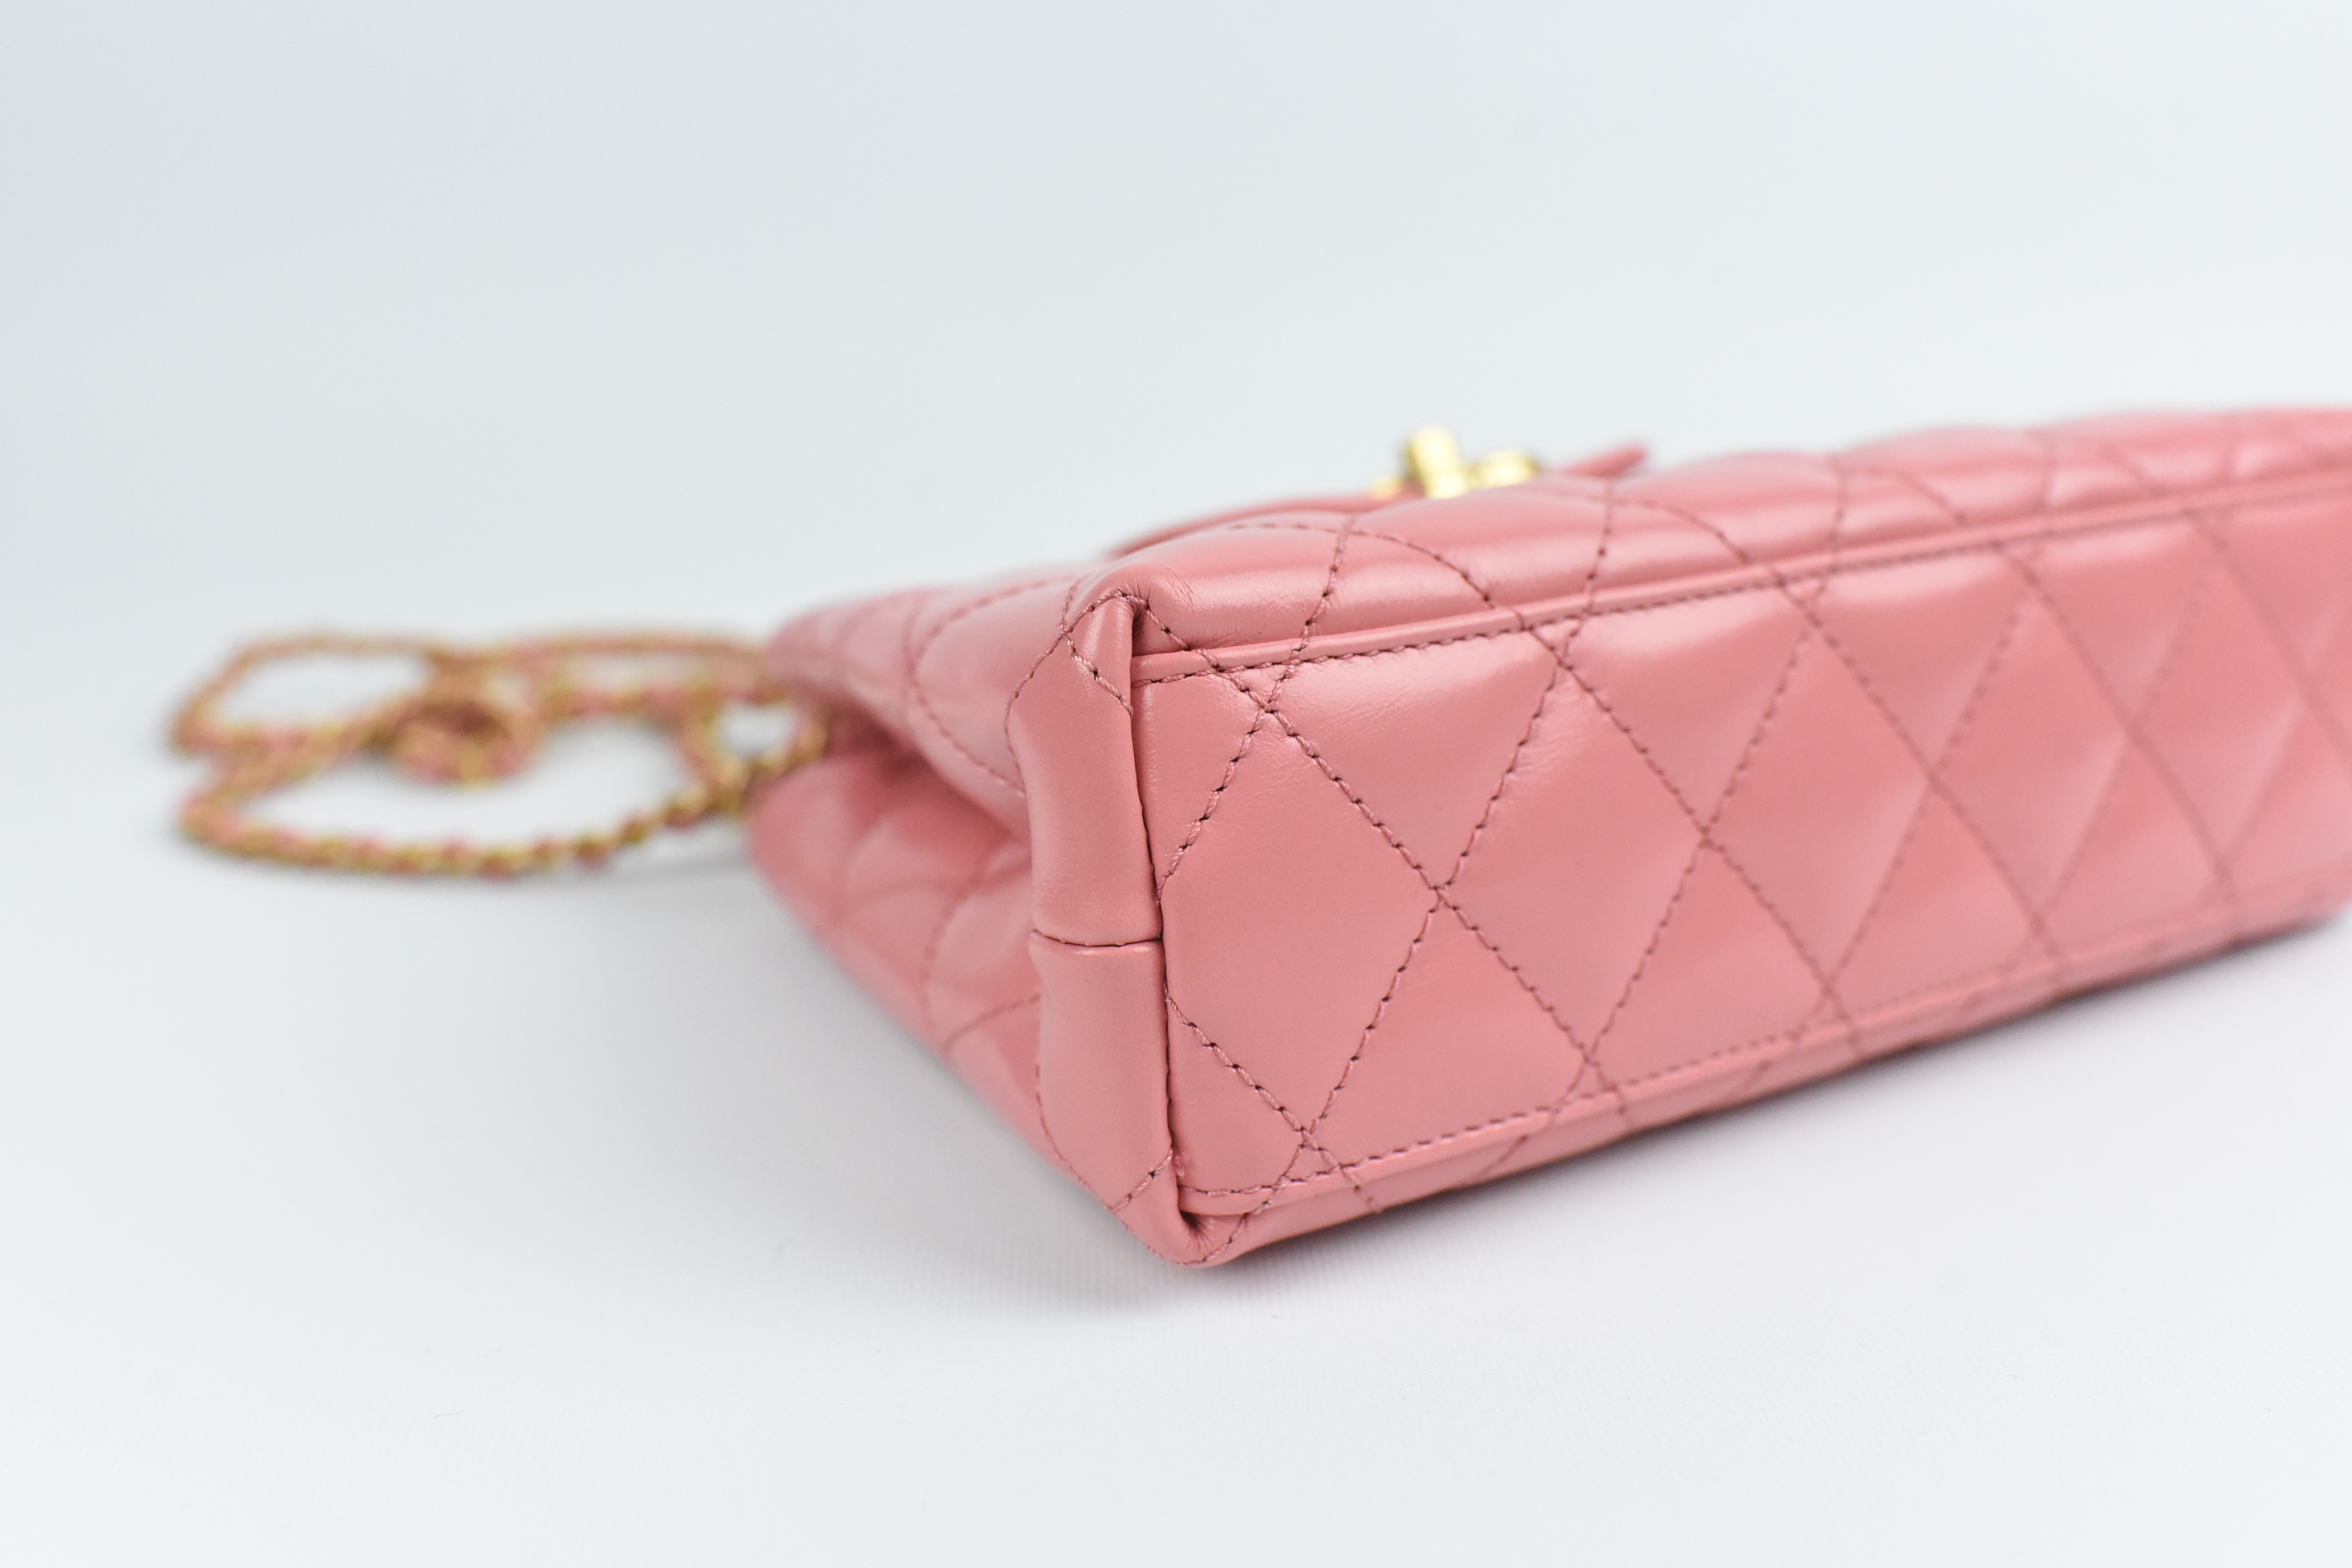 Chanel Kelly Bag Small, Pink Calfskin Leather with Gold Hardware, New In Box  GA003 - Julia Rose Boston